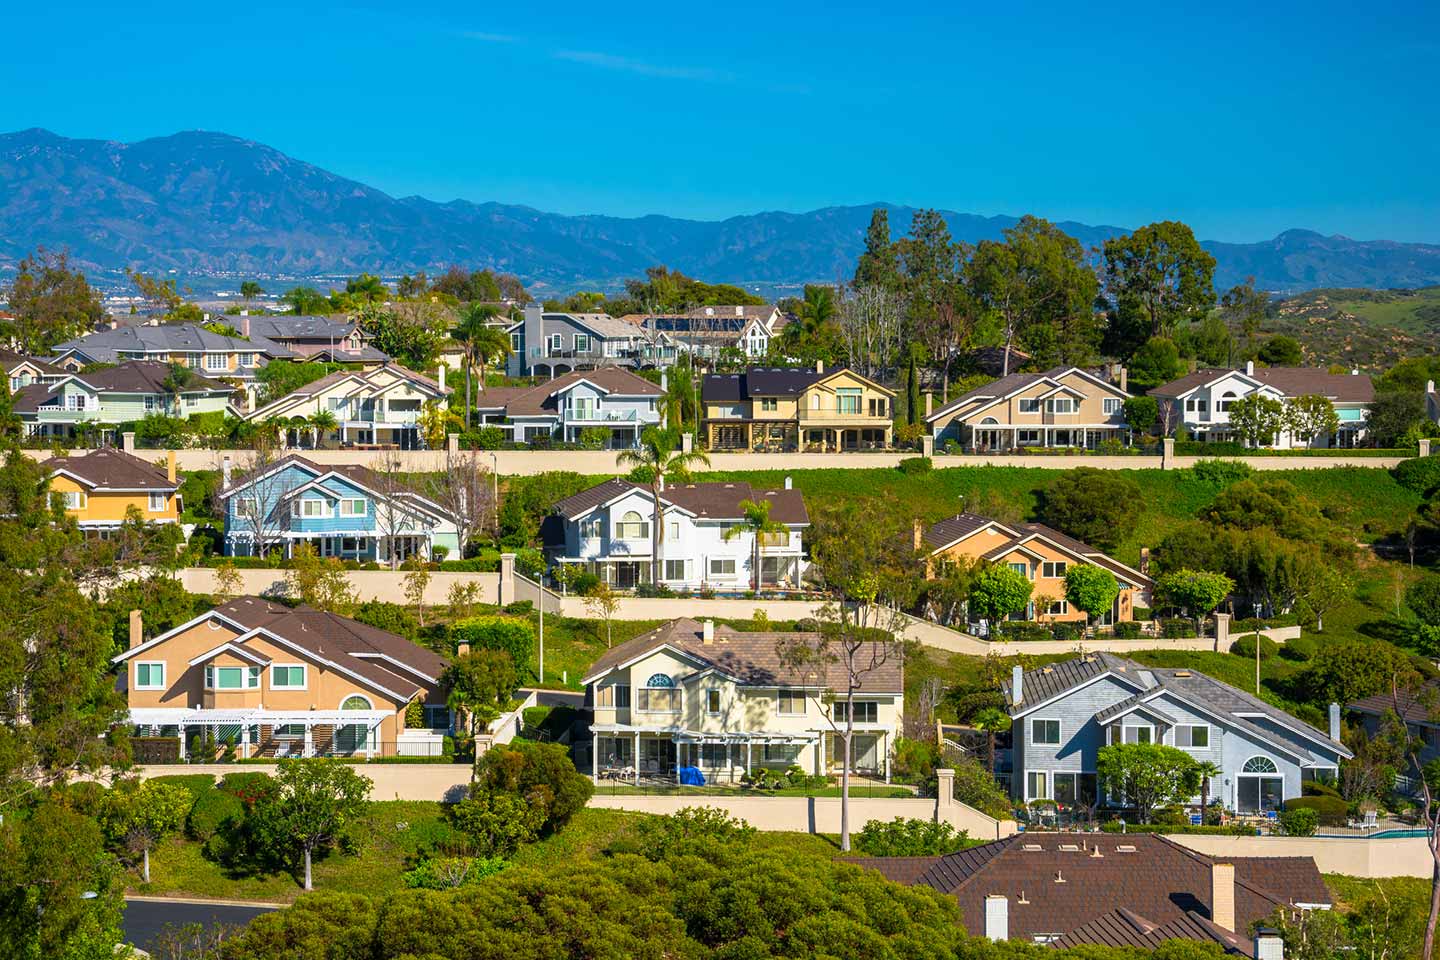 A hillside of CA houses with mountains in the background